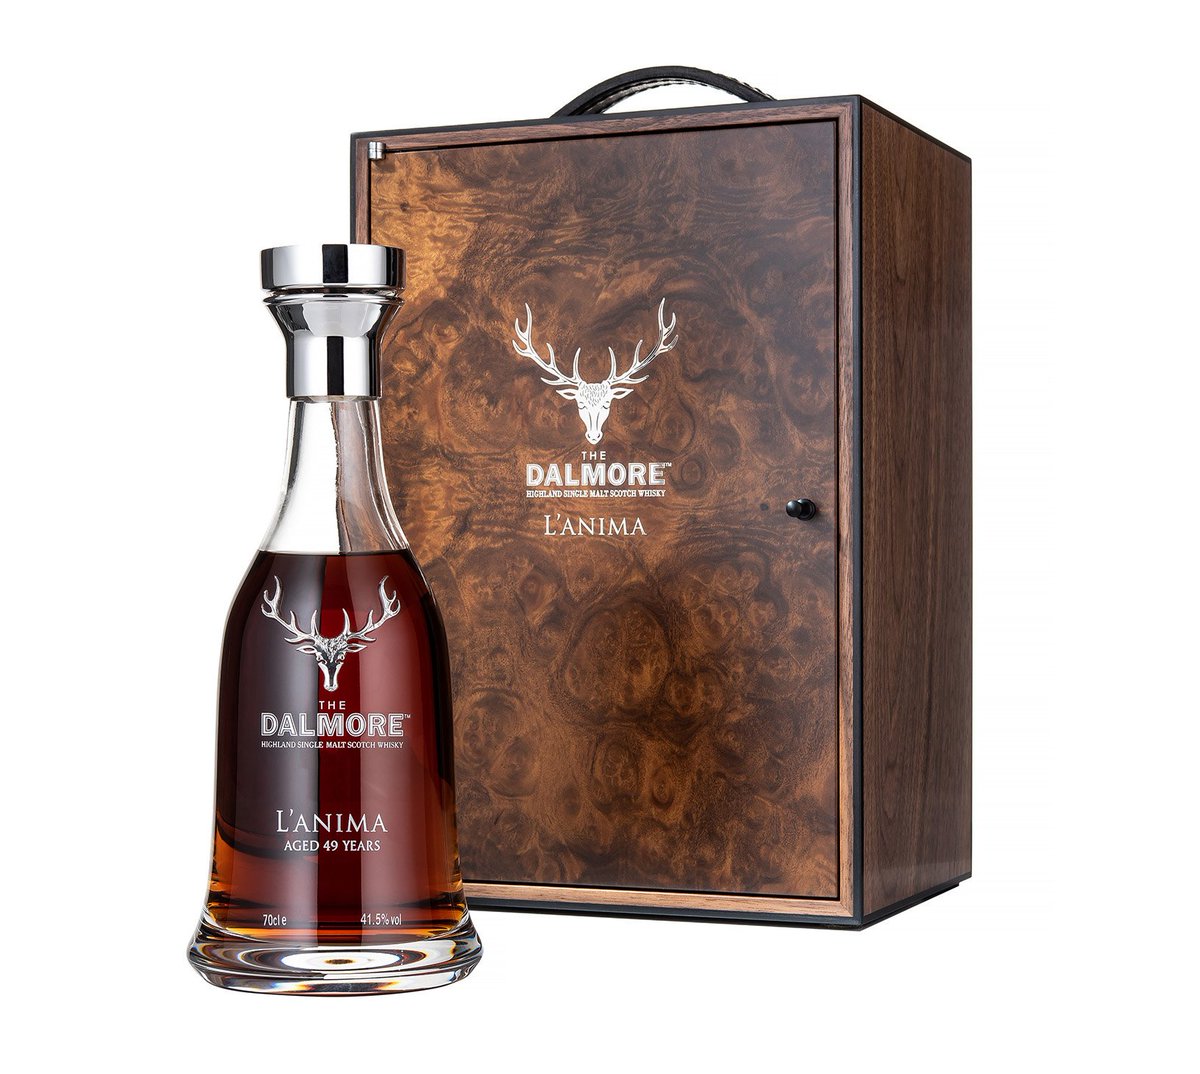 The Dalmore L’Anima Aged 49 Years has sold for £108,900 at @Sothebys, with all proceeds benefiting the world’s best chef @massimobottura’s non-profit organisation, @FoodforSoul_it. Congratulations to all involved to reach this exceptional result!